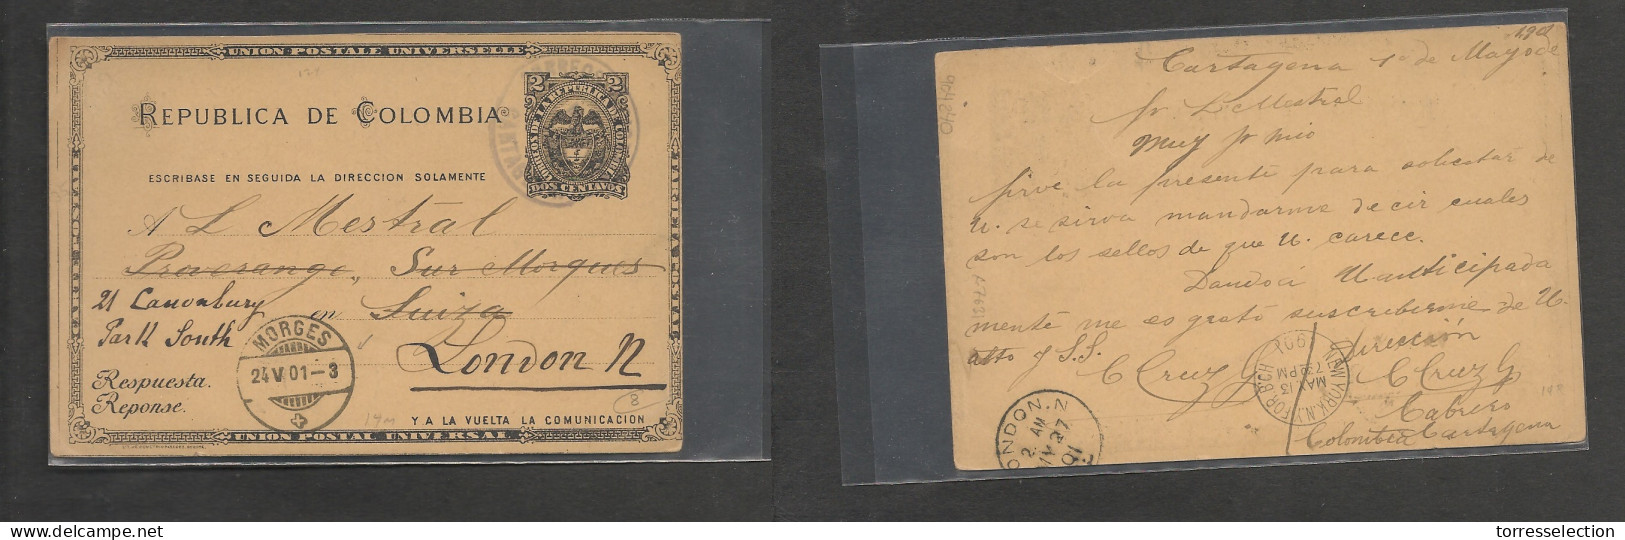 COLOMBIA. Colombia Cover - 1901 Cartagena To Switz Morges 2c Stat Card , Fwded, Vf XSALE. - Colombia